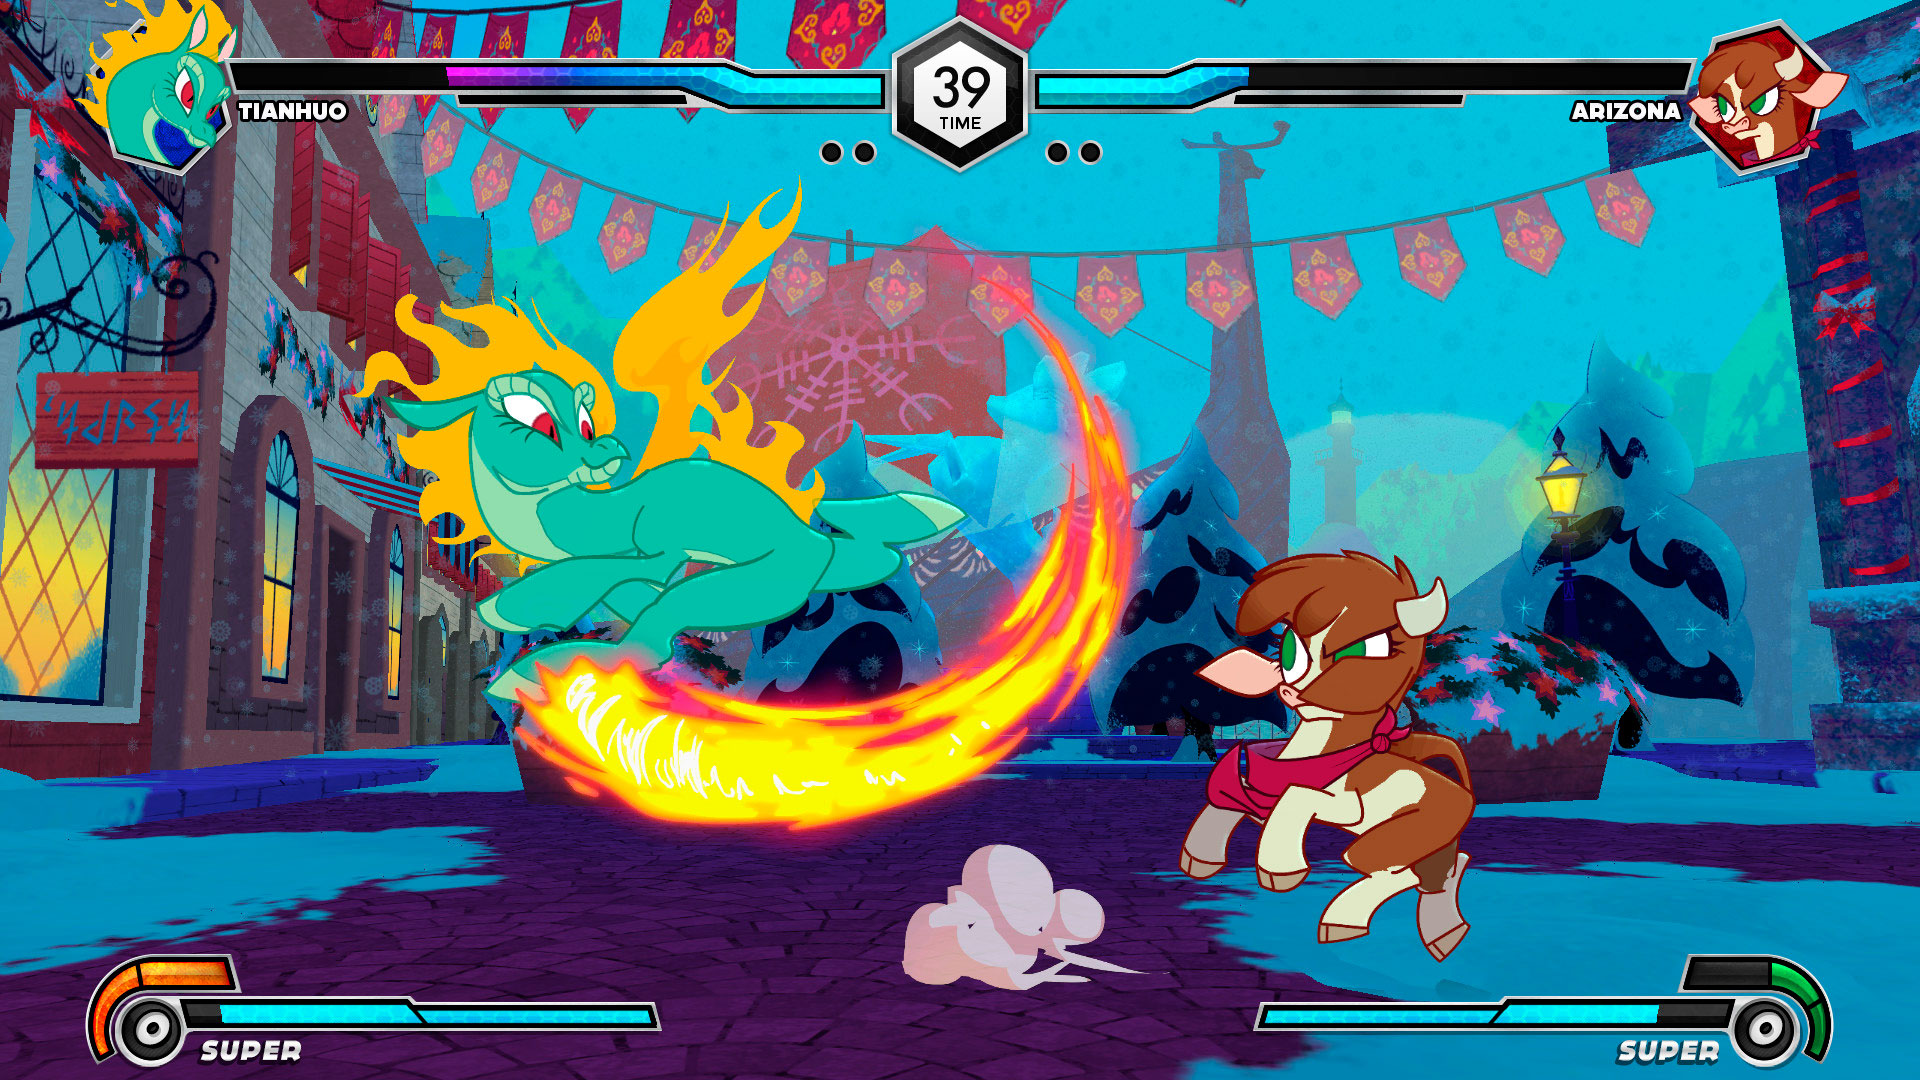 Jogo Them's Fightin Herds Deluxe Edition para PS5